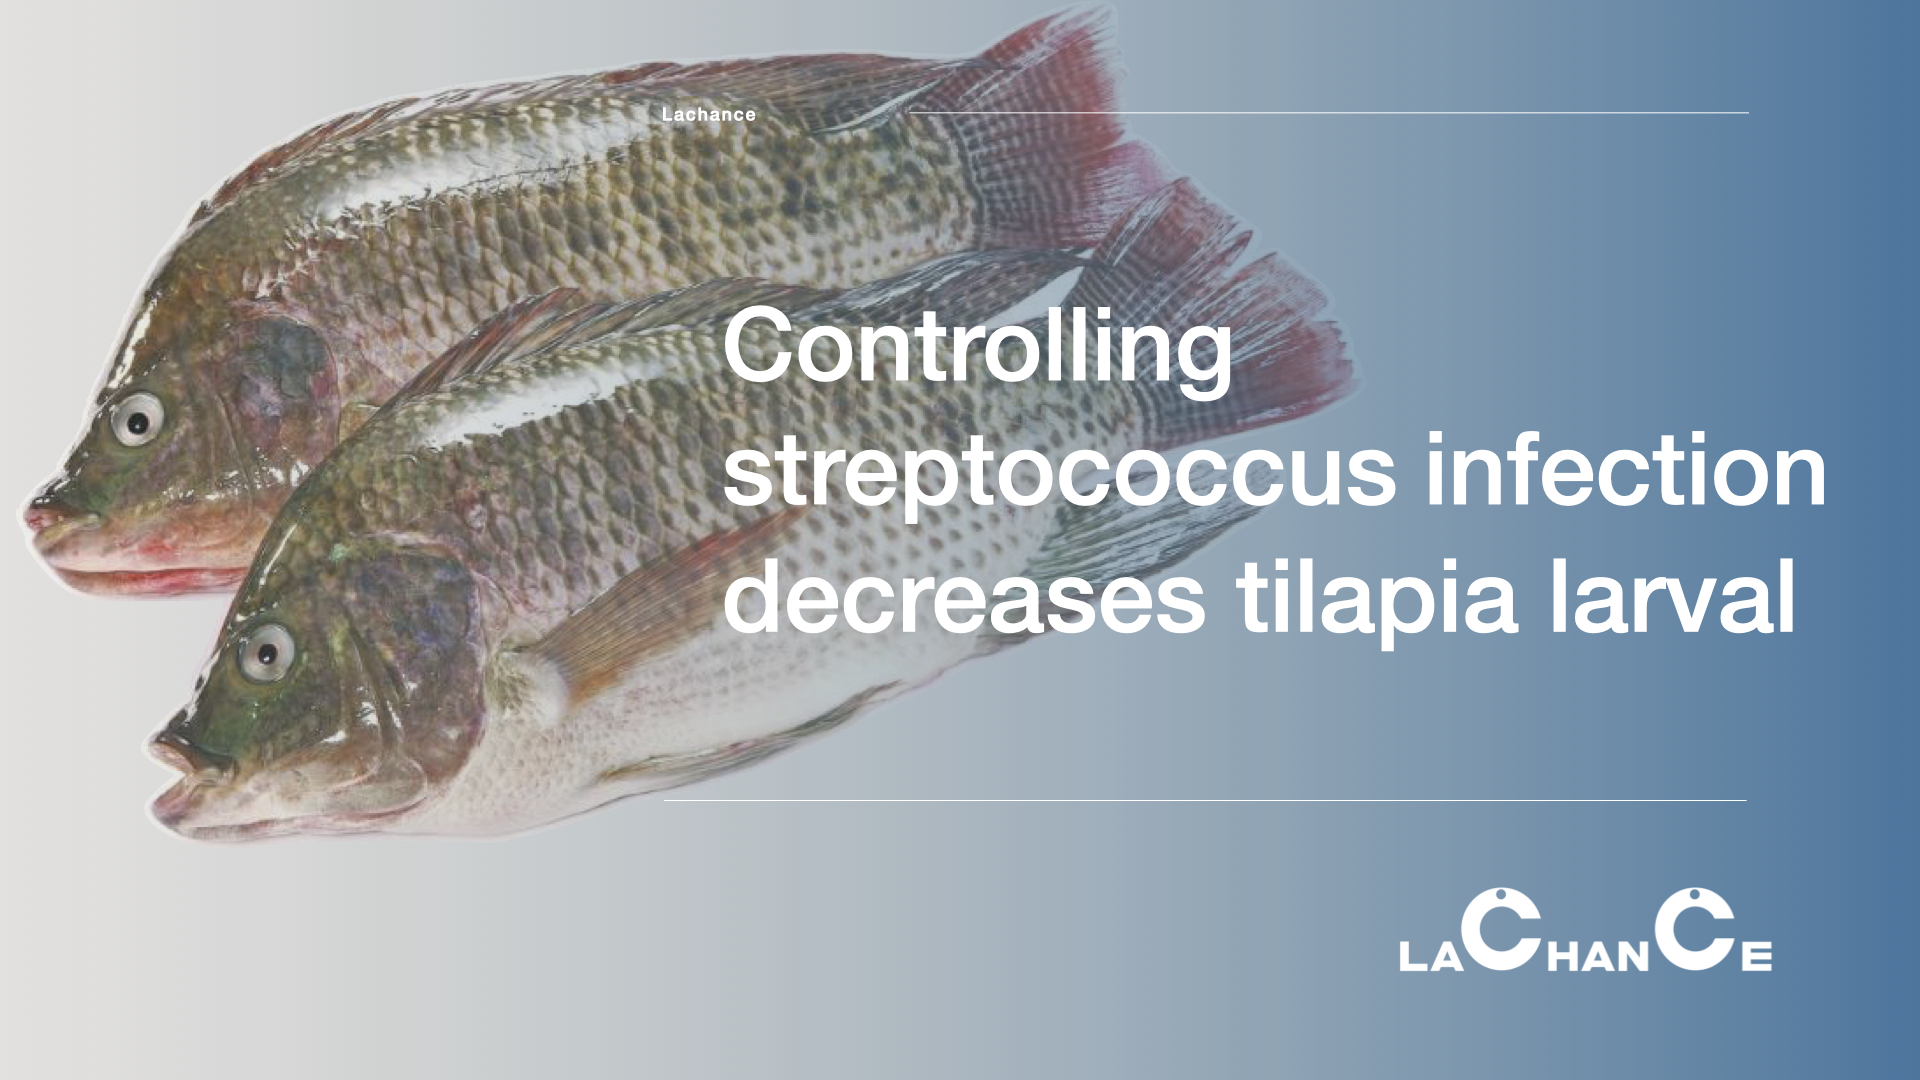 Controlling streptococcus infection decreases tilapia larval mortality